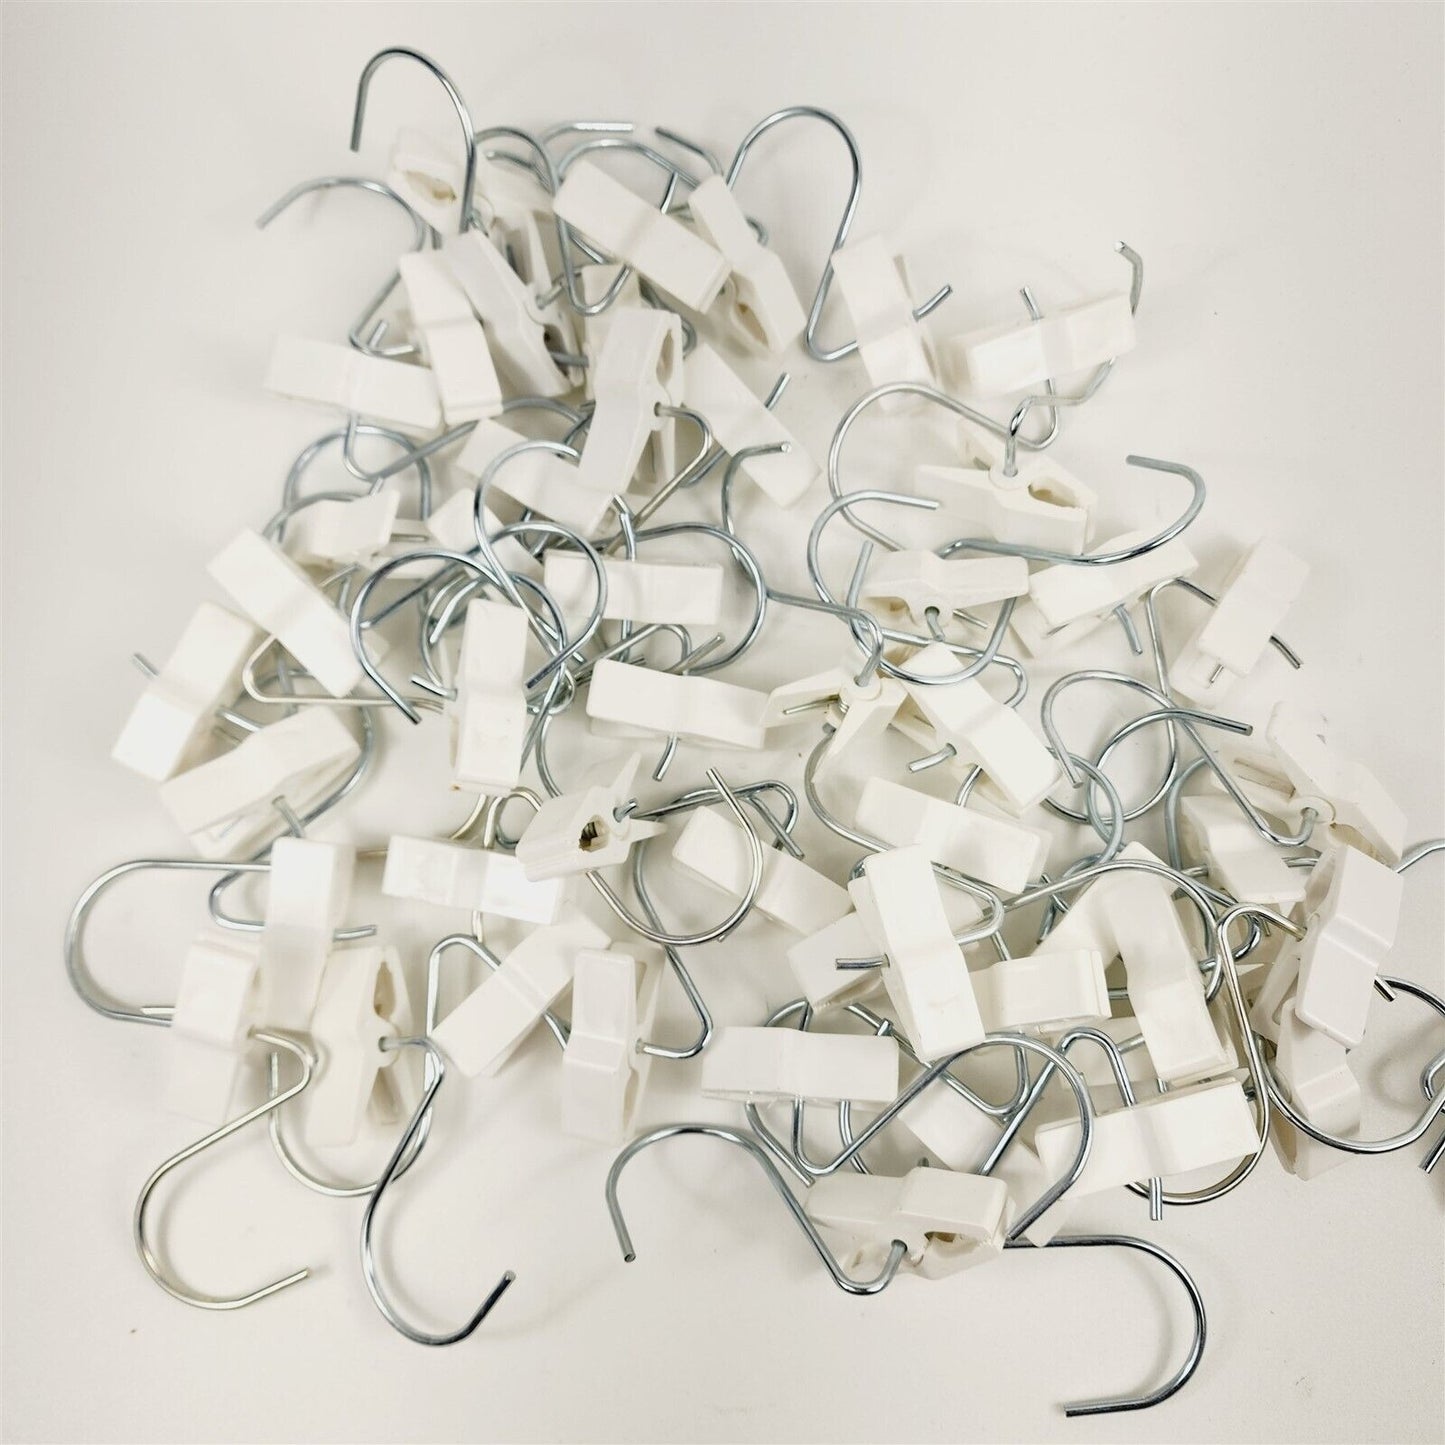 50 White Boot Clip Hangers Plastic Clip Metal Hook - Holds 4+ Lbs